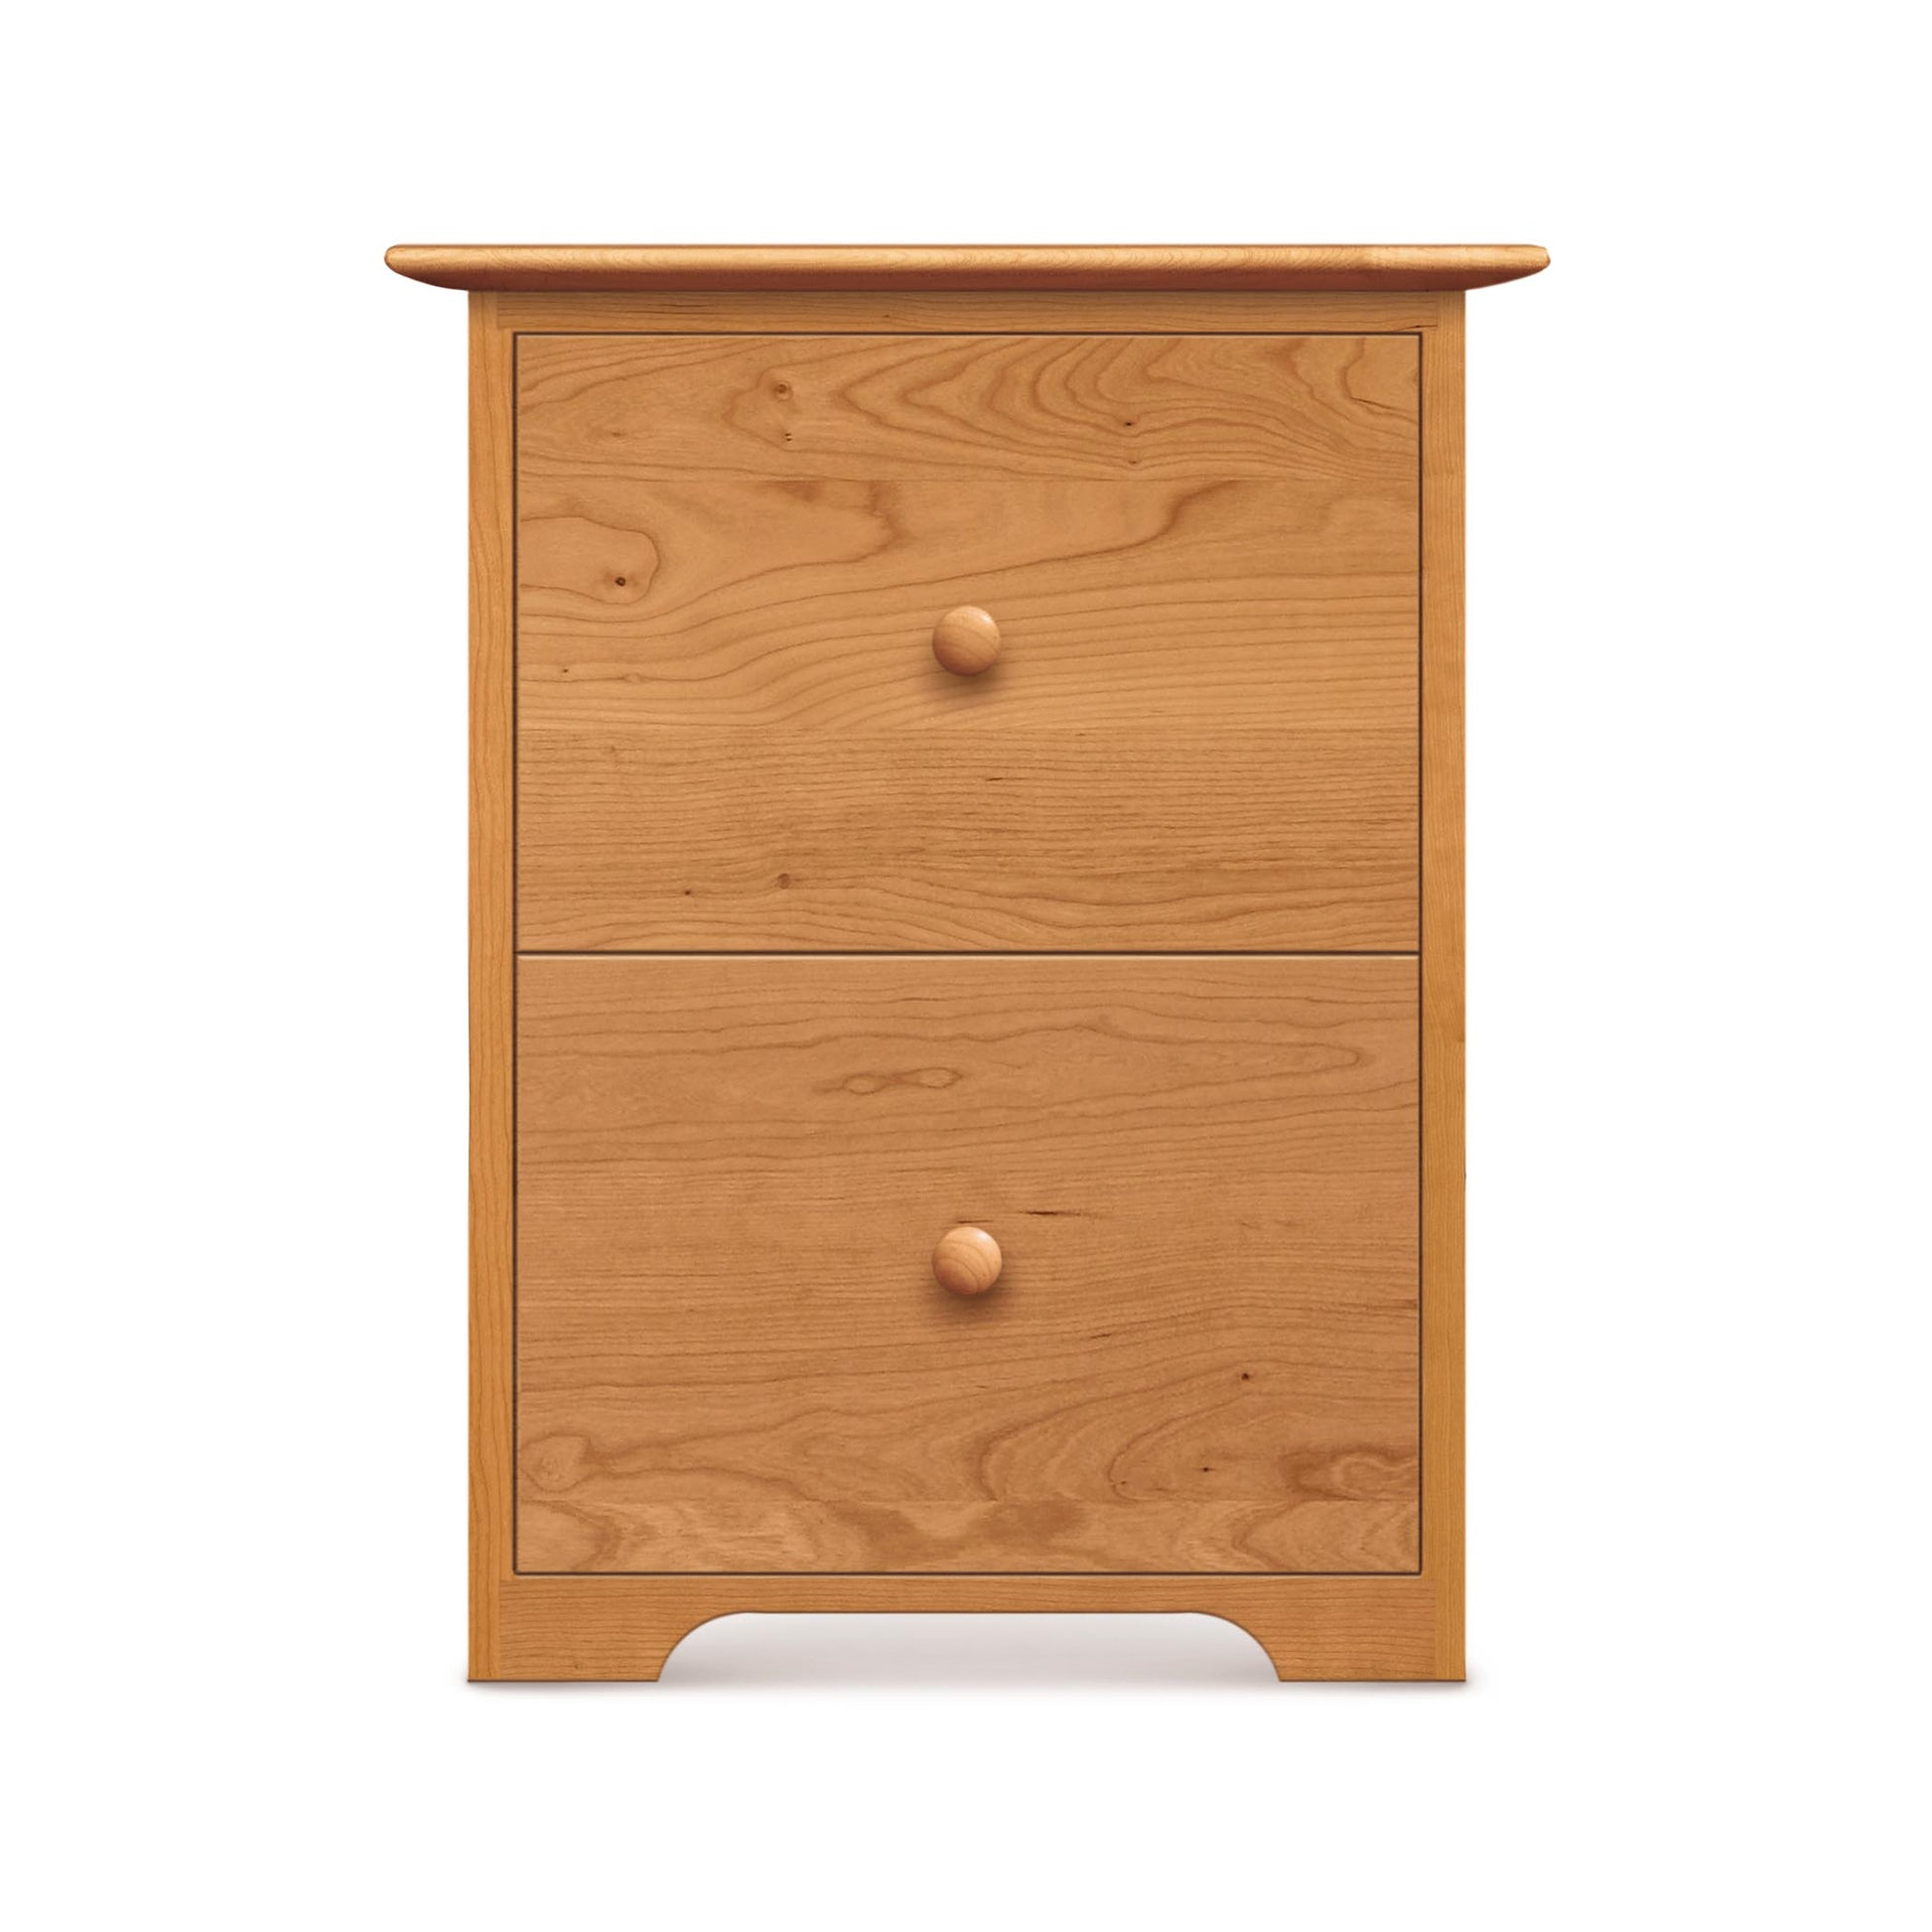 A Sarah Rolling Filing Cabinet by Copeland Furniture isolated on a white background.